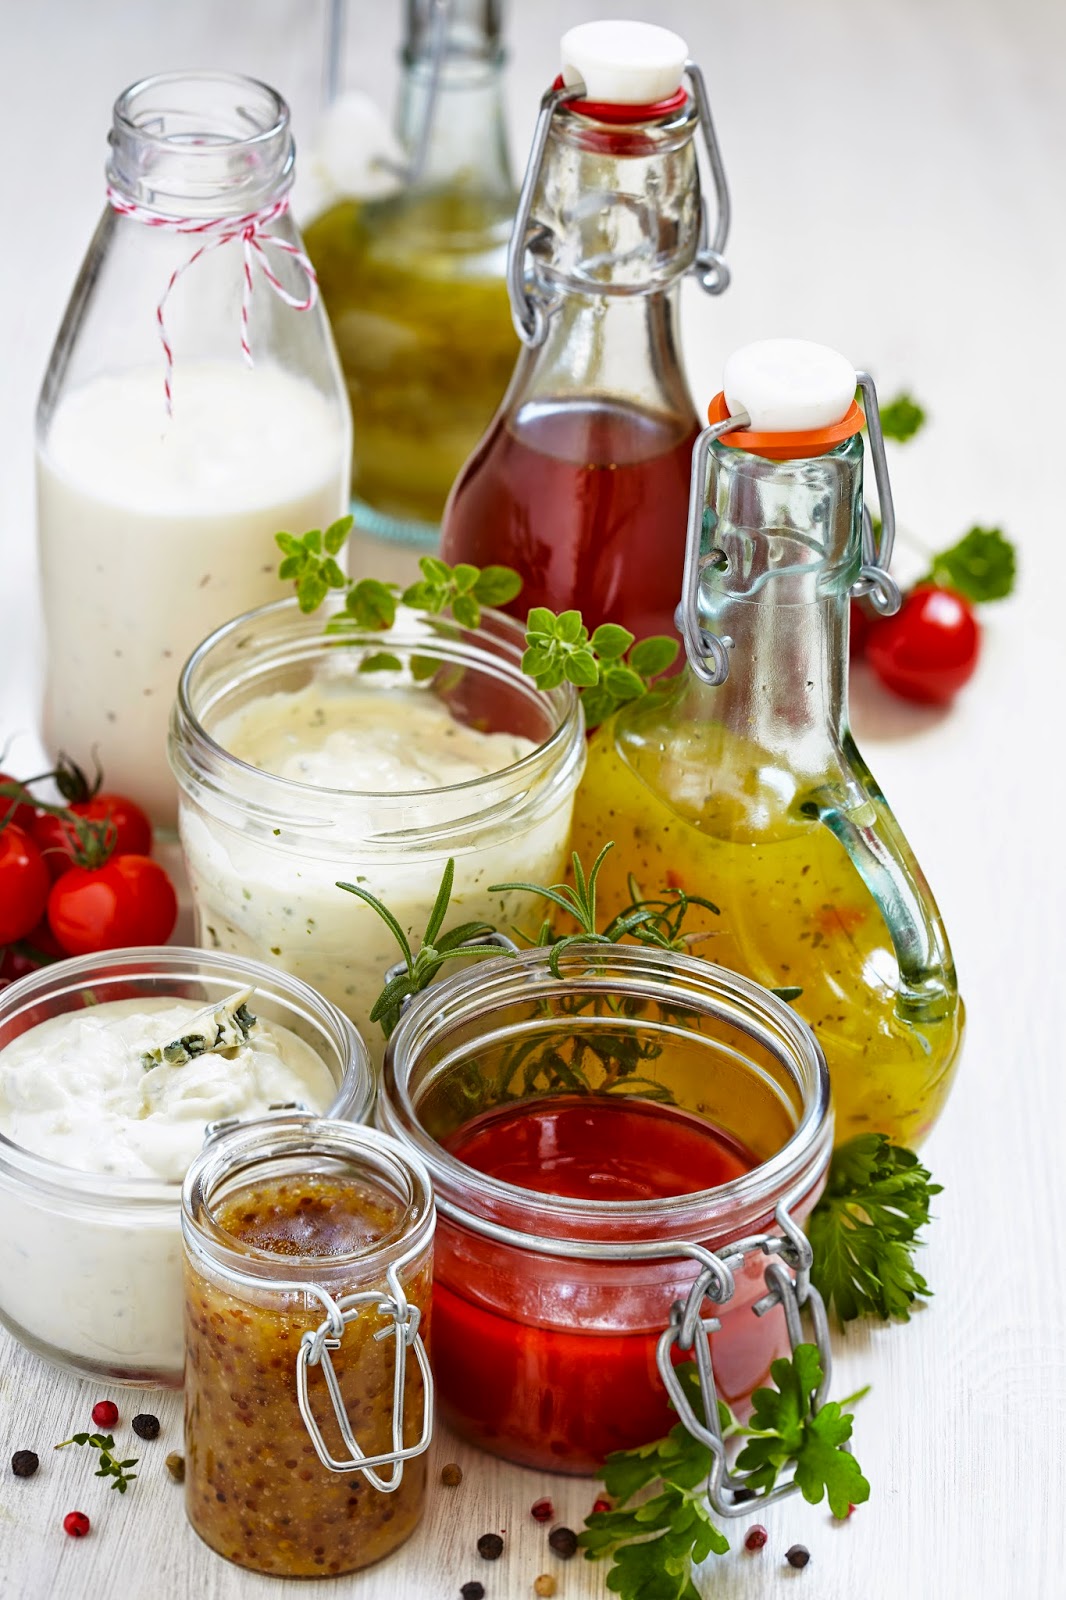 Passionately Raw! : 8 Healthy Easy-to-Make Raw Salad Dressings